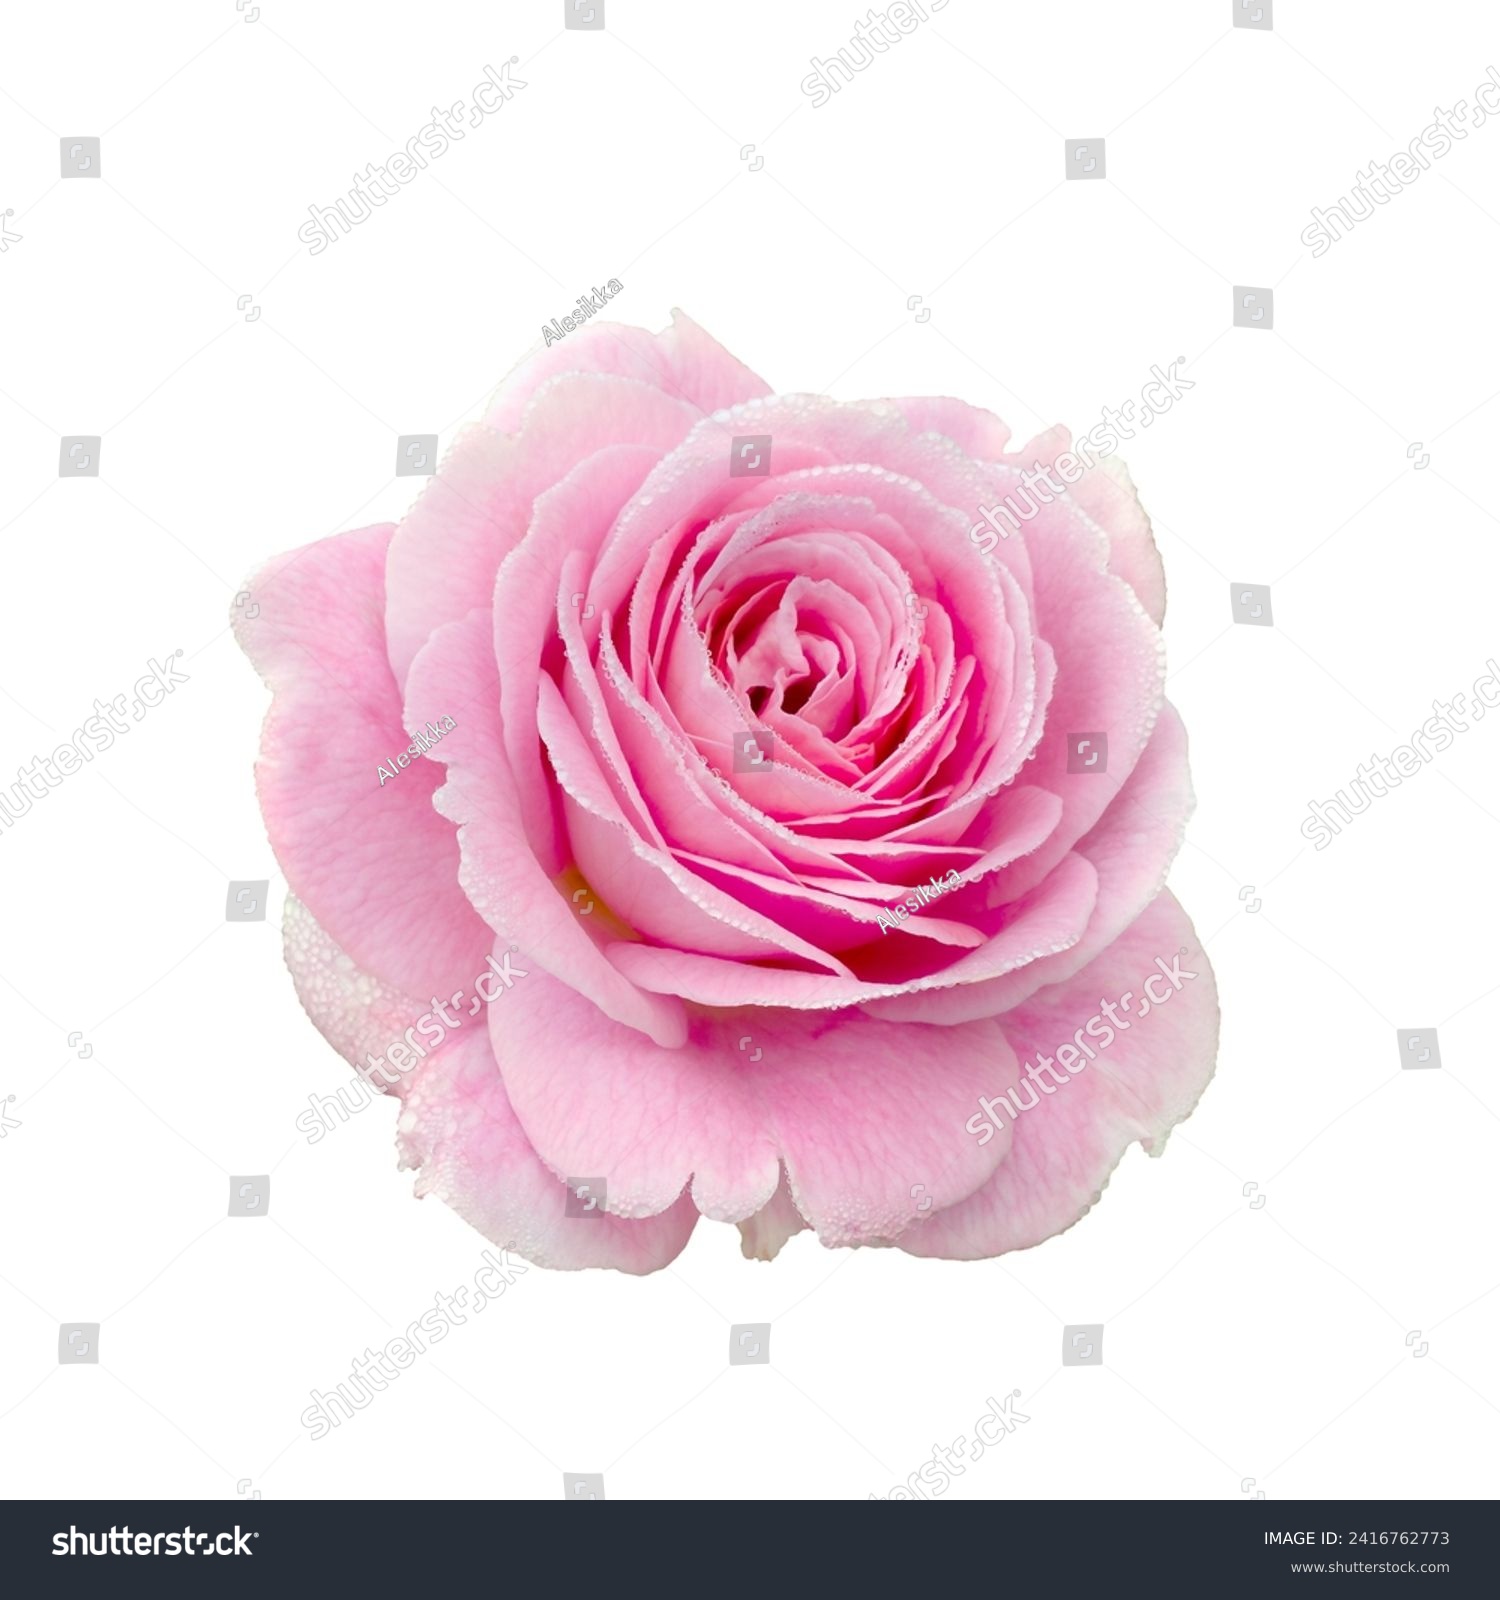 Fresh beautiful pink rose with dew drops isolated on a white background. Detail for creating a collage #2416762773